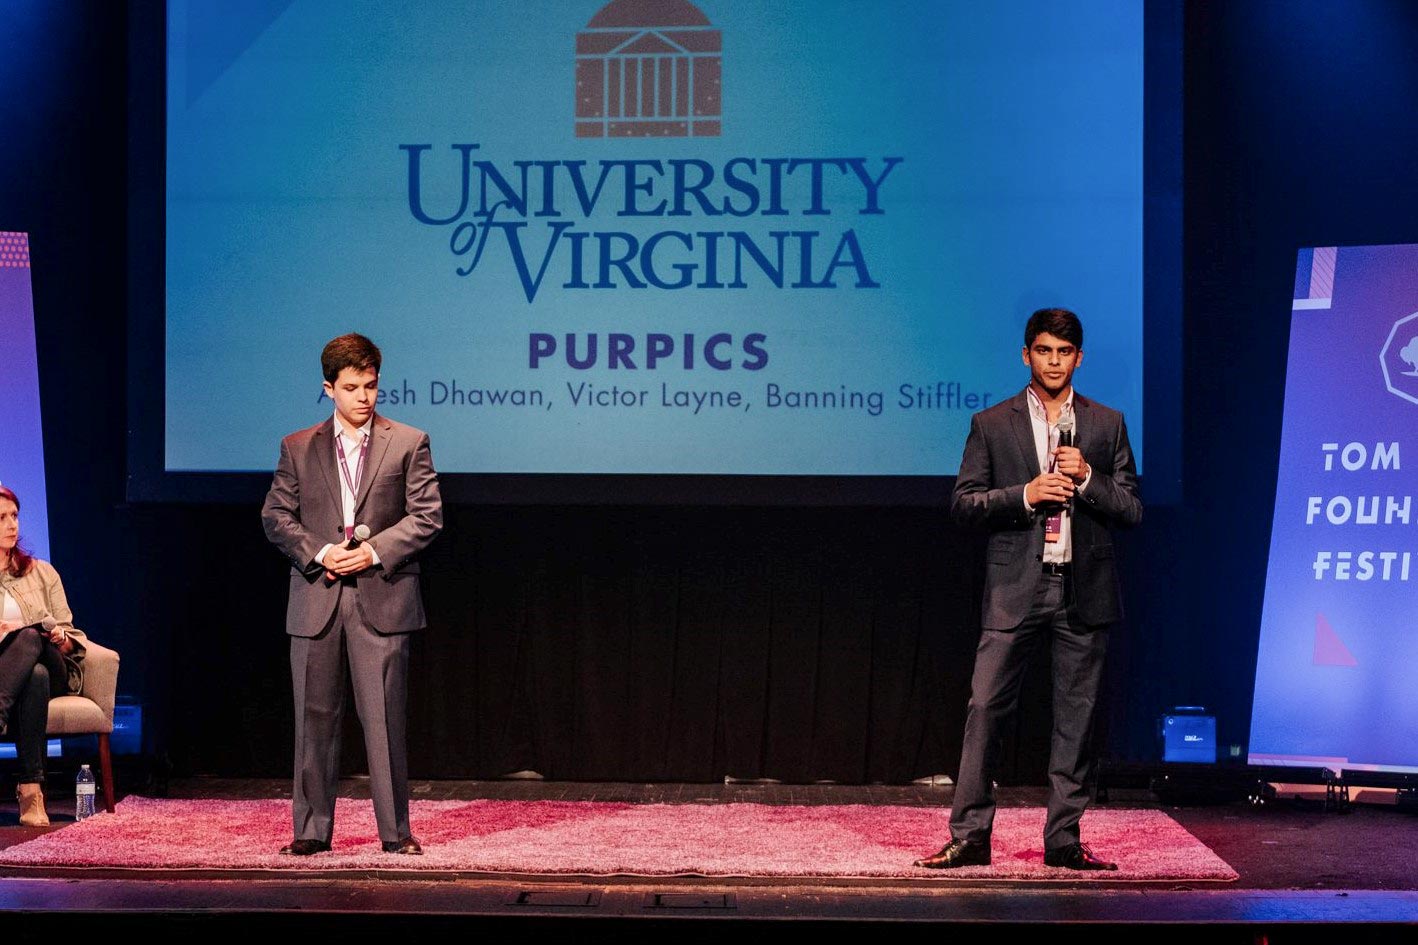 Layne, left, and Dhawan stand on stage making a presentation